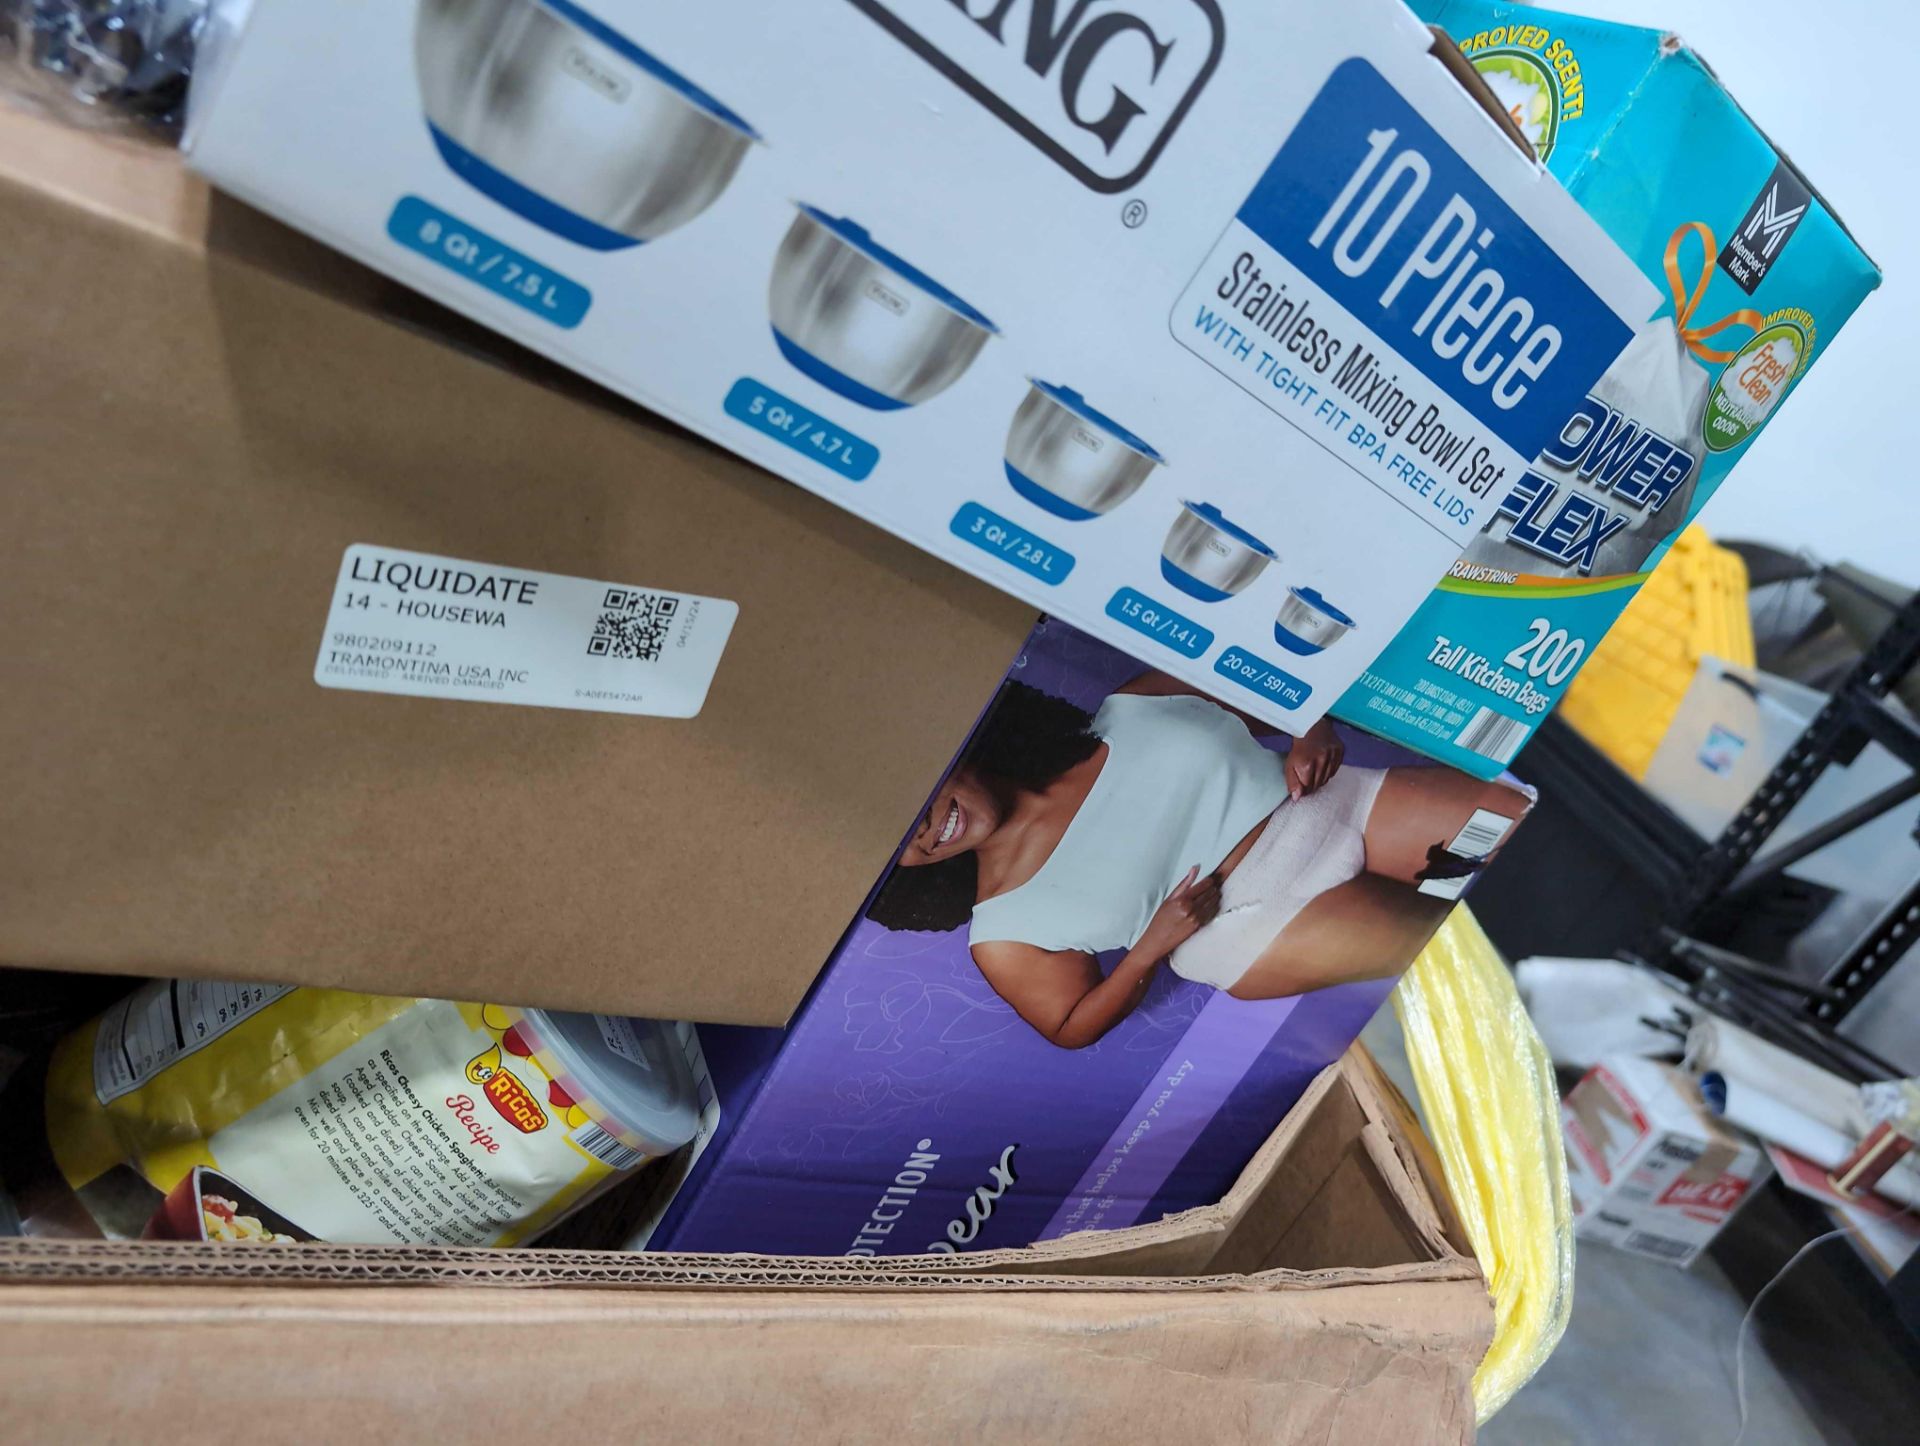 Big box store in box: viking bowls, takis, pudding, country time lemonade, quest chips, popcorn, cut - Image 4 of 16